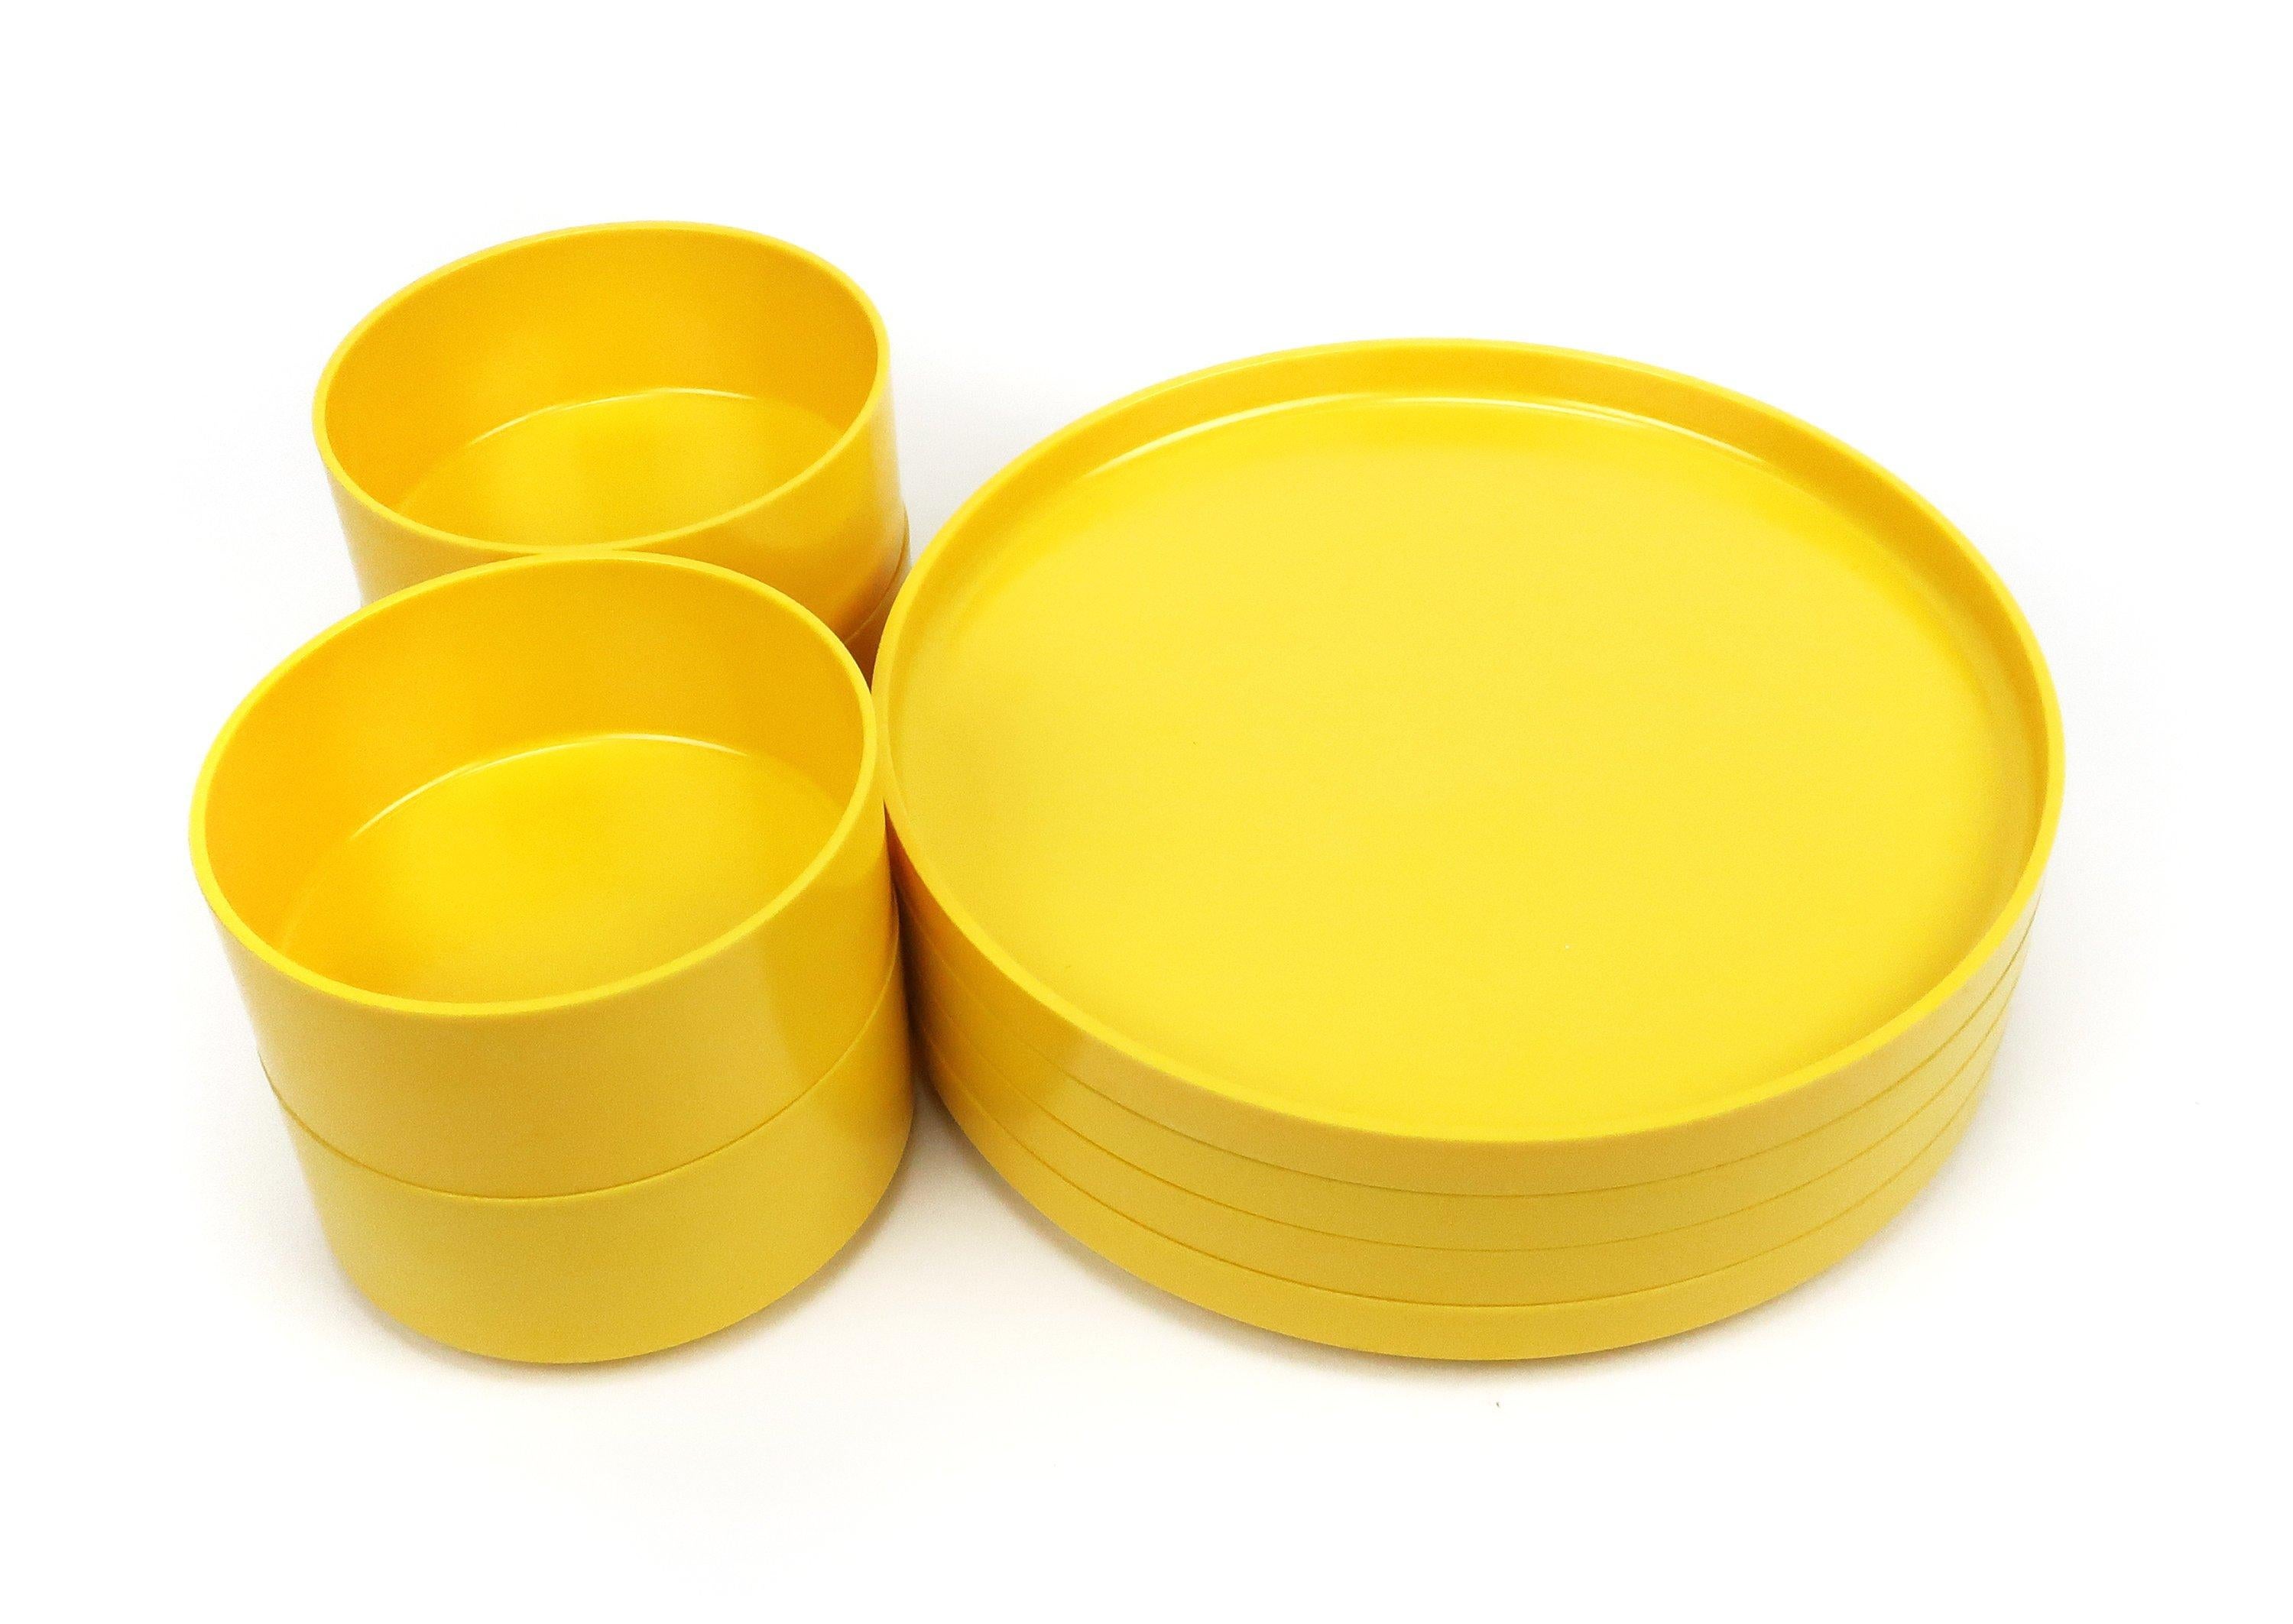 Winner of the prestigious Compasso d'Oro award for Good Design in 1964, Massimo Vignelli’s iconic dinnerware for Heller (likely designed with his equally talented wife Lella) is produced in a rainbow of colors. This is a set of four bowls and four